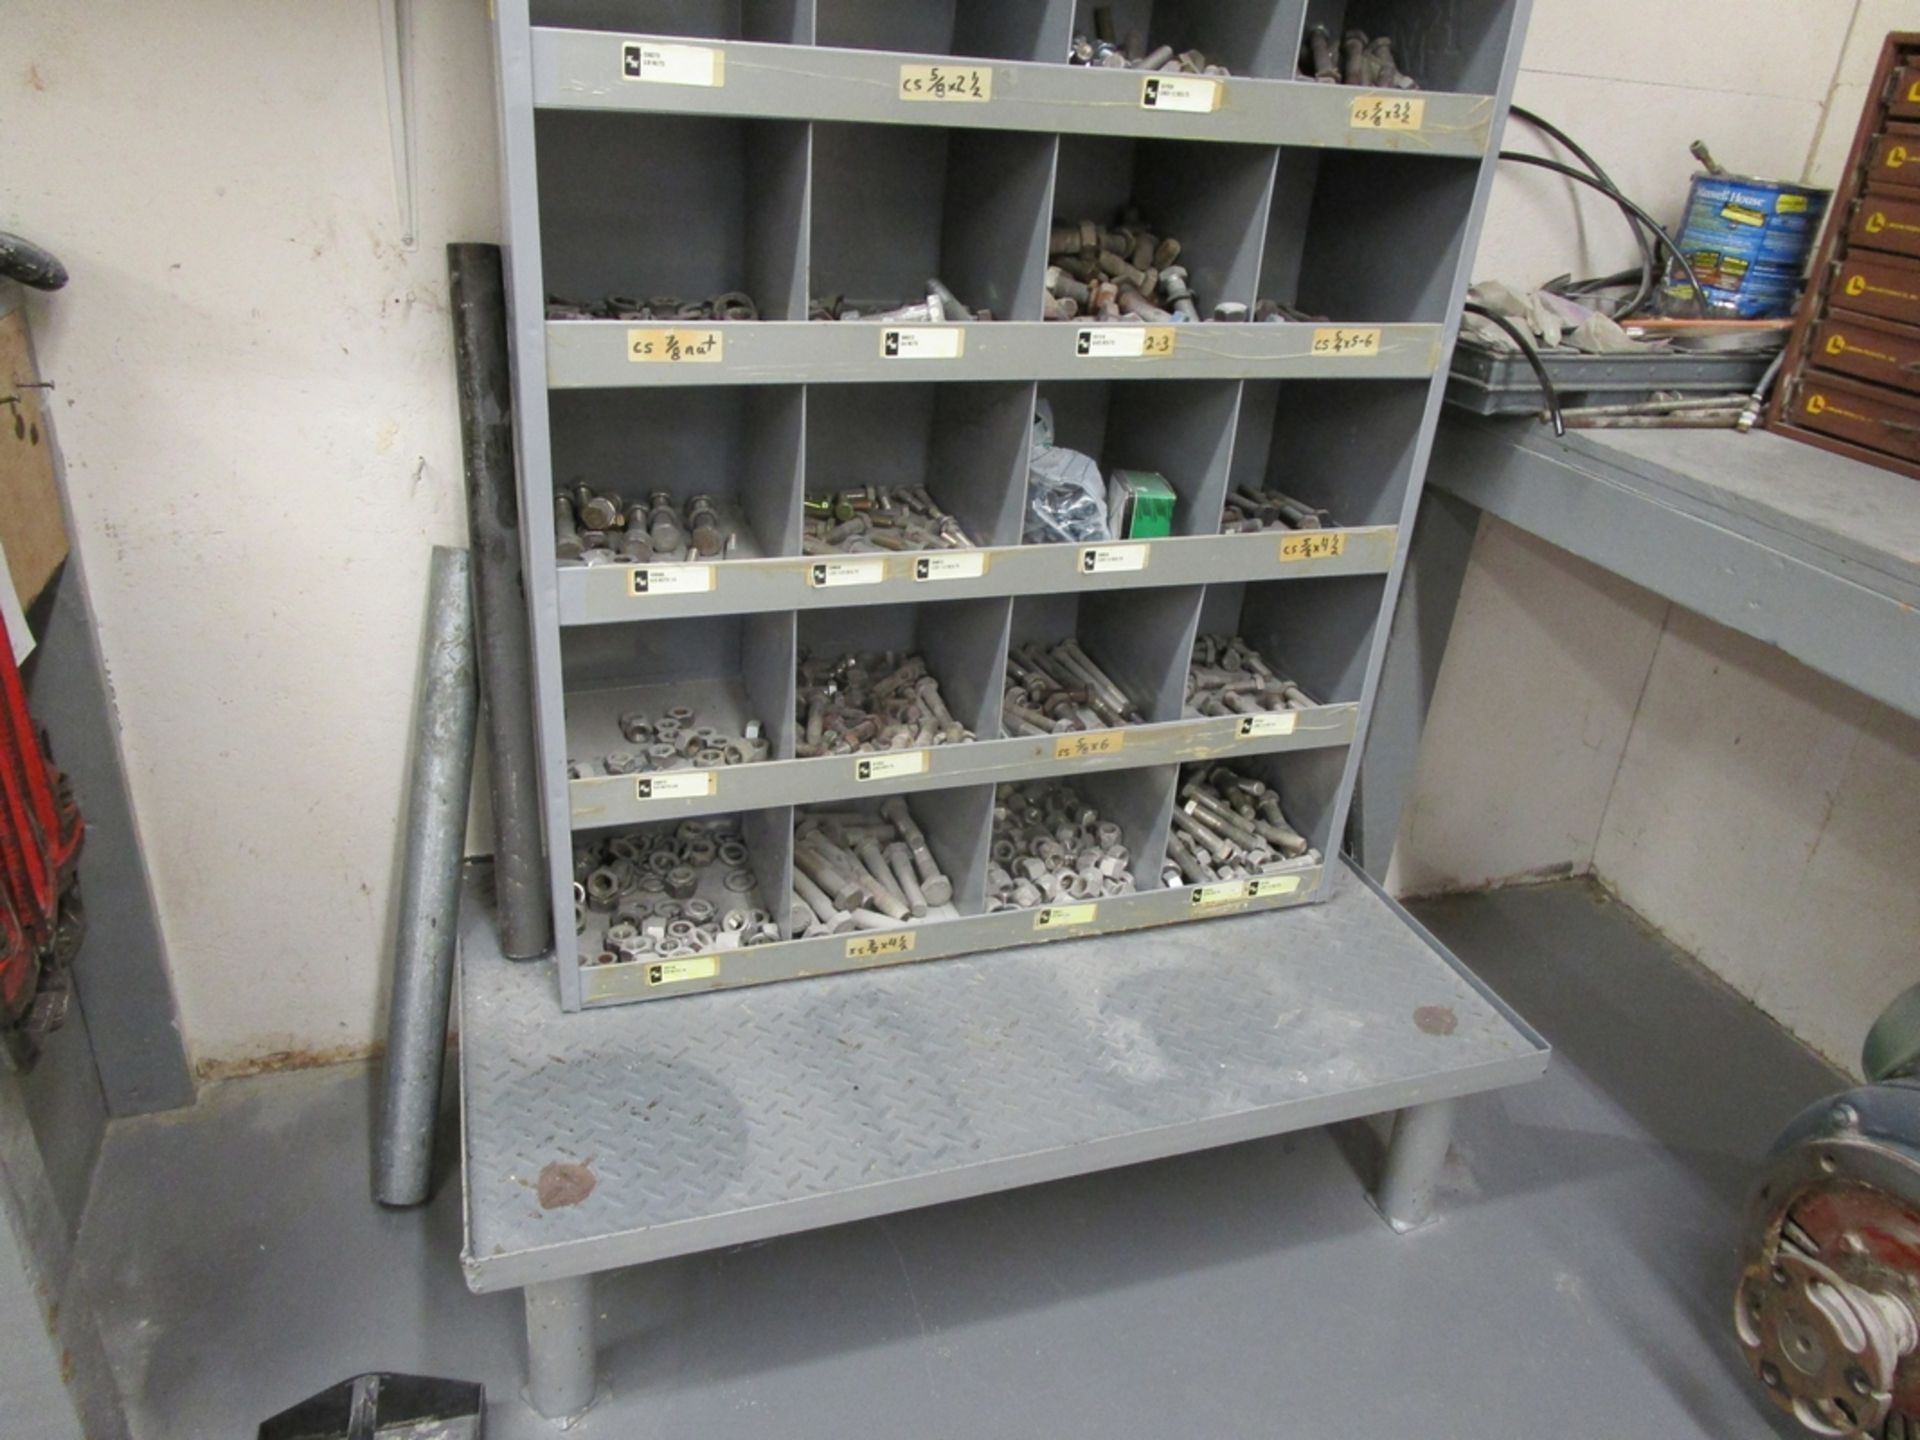 Kimball Midwest / Lawson Products Hardware Bins - Image 2 of 2